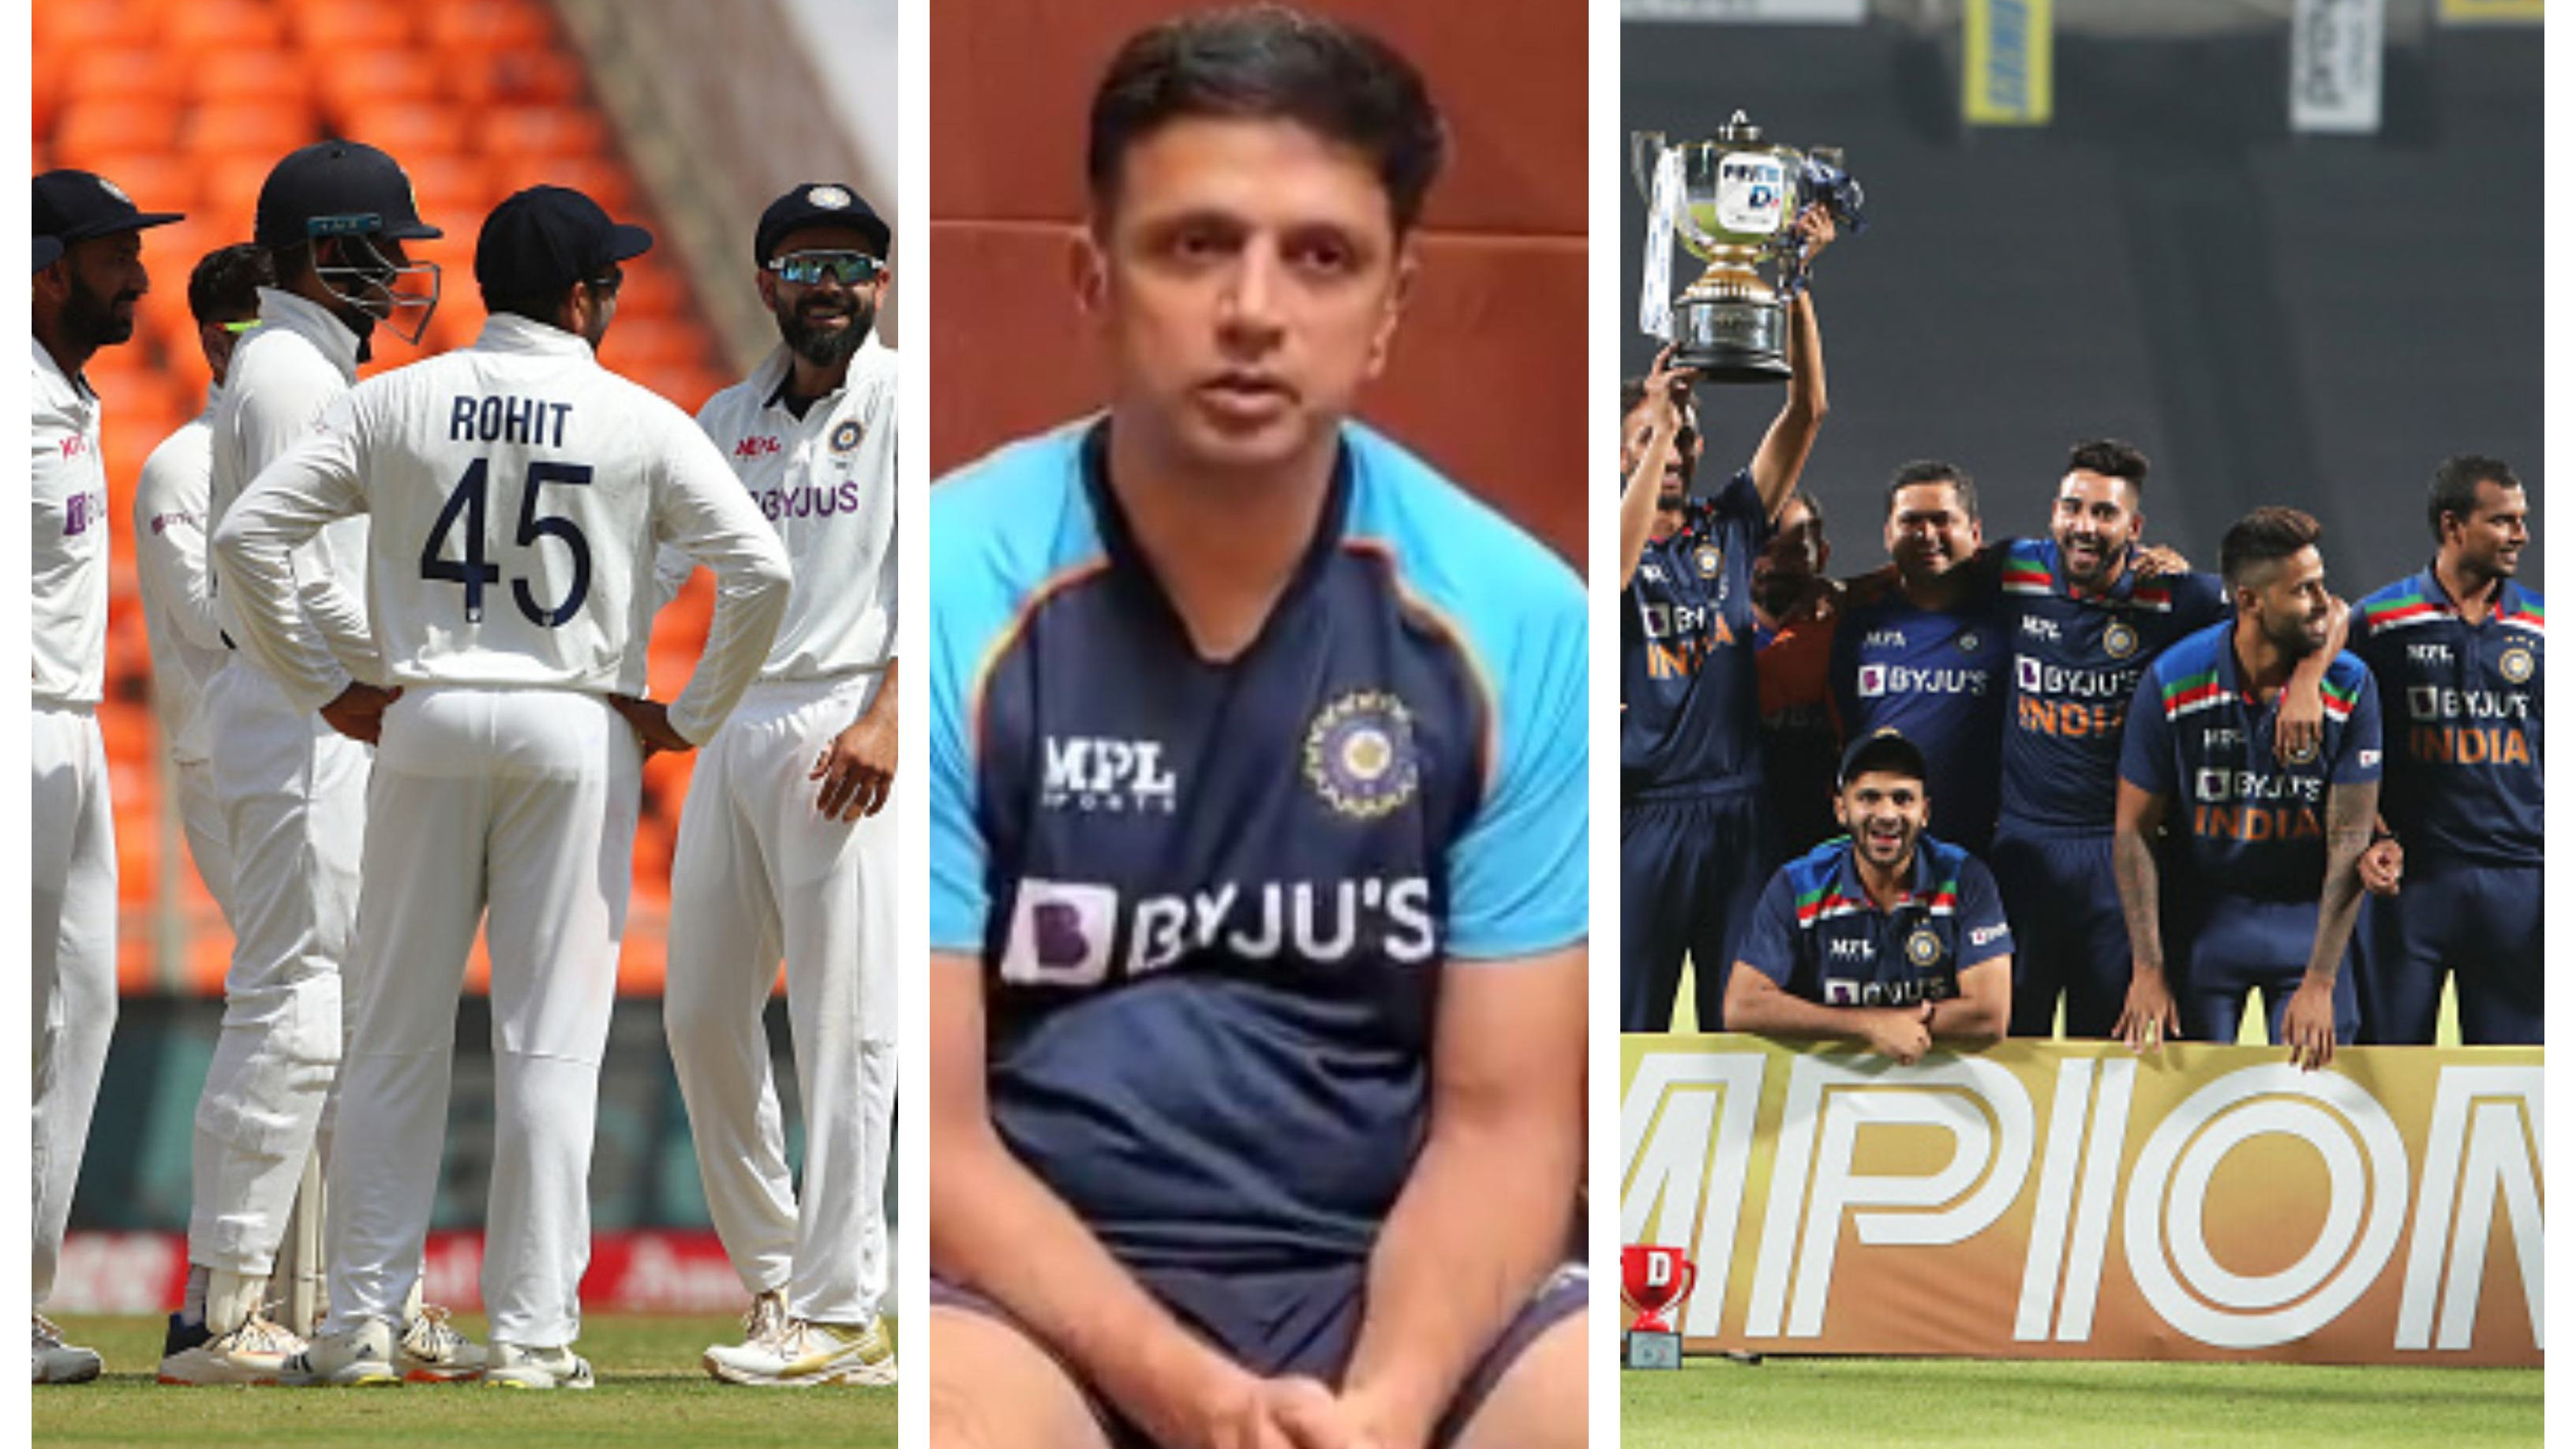 SL v IND 2021: ‘Not sure if it is a long-term solution’, Dravid on India fielding two squads simultaneously